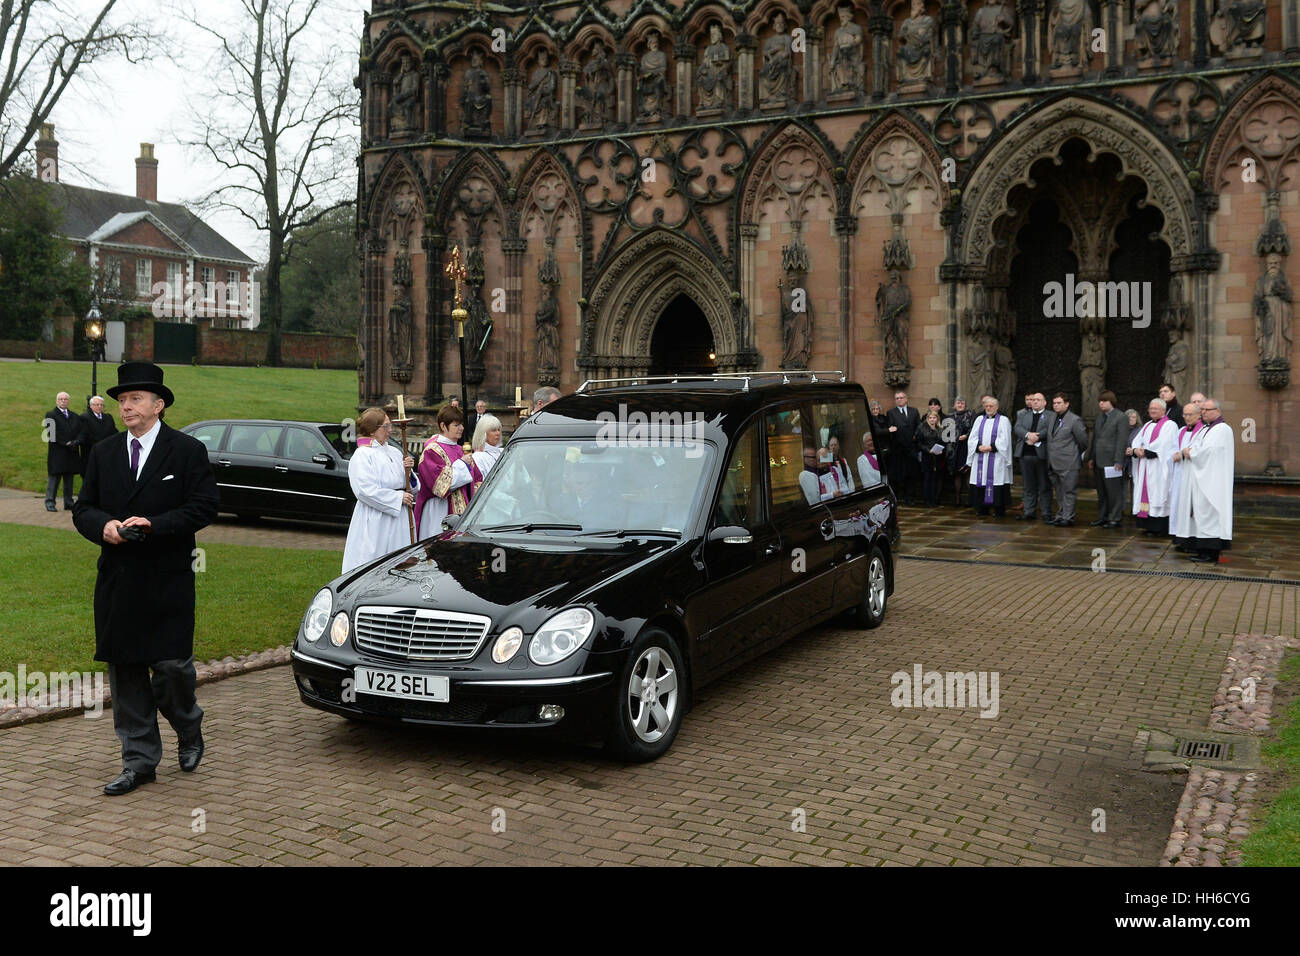 The funeral cortege for Jill Saward leaves Lichfield Cathedral in Staffordshire after her funeral. Stock Photo